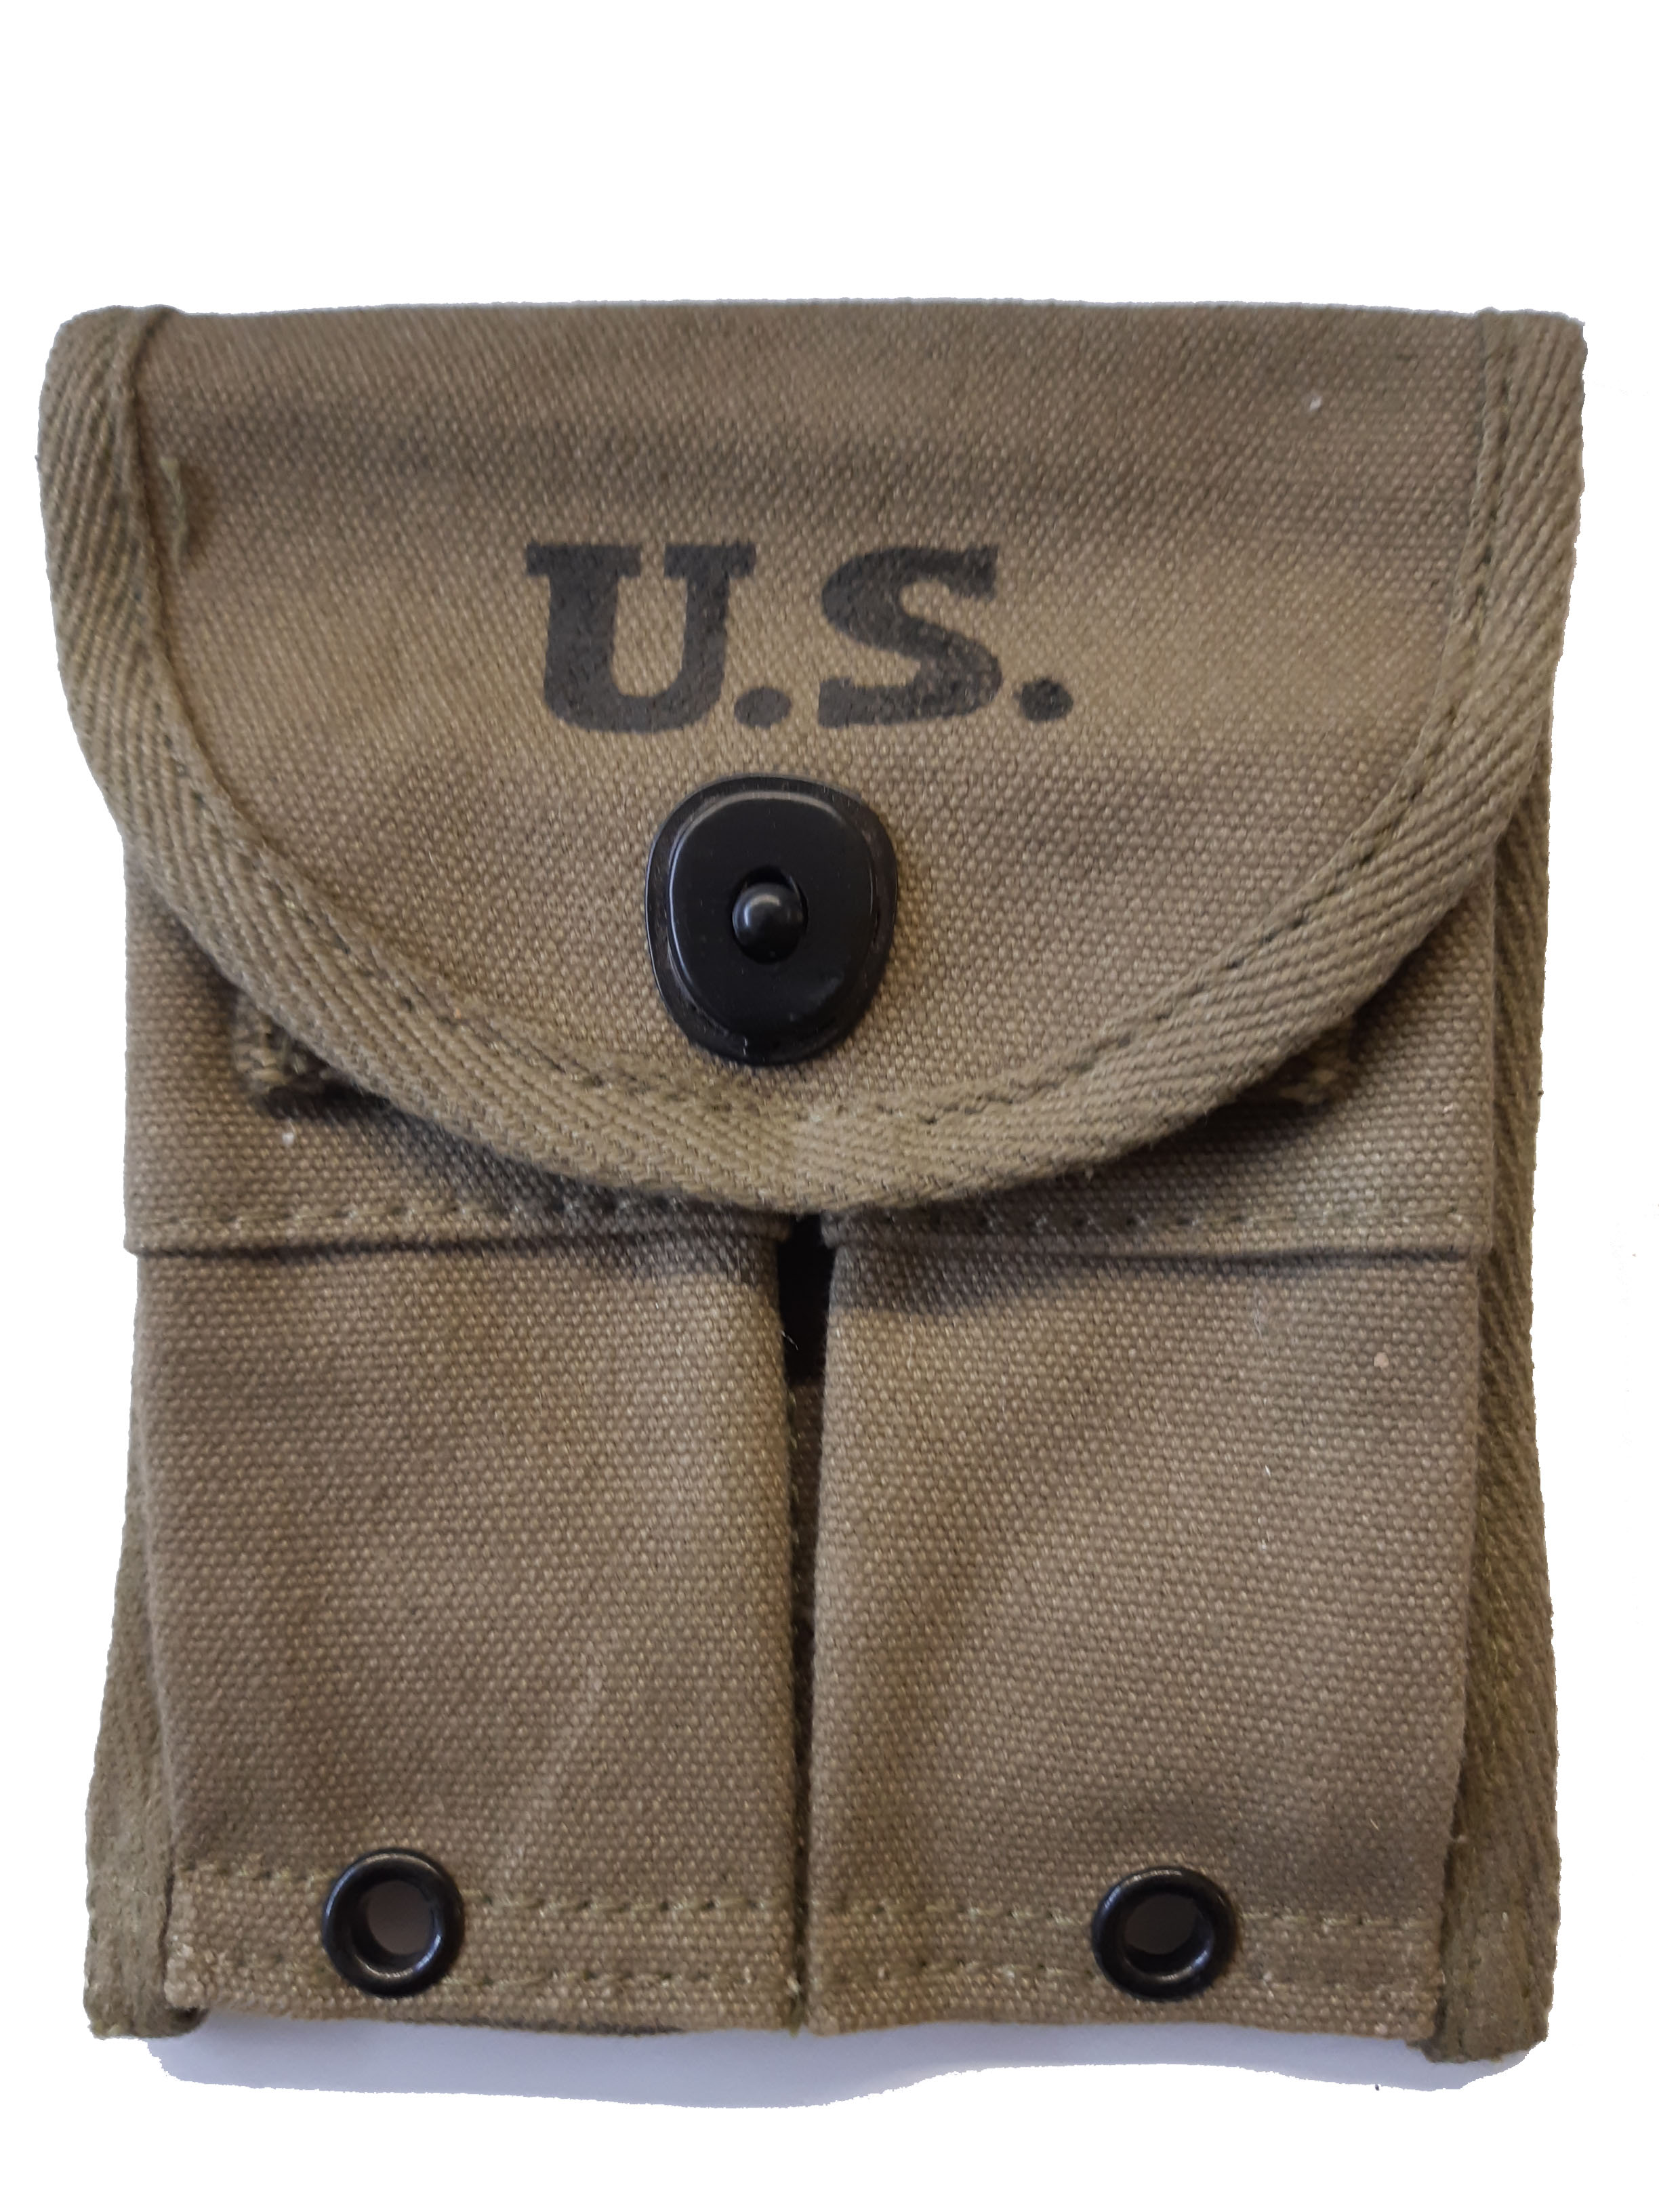 US WWII M1 CARBINE MAGAZINE POUCH DATED 1944